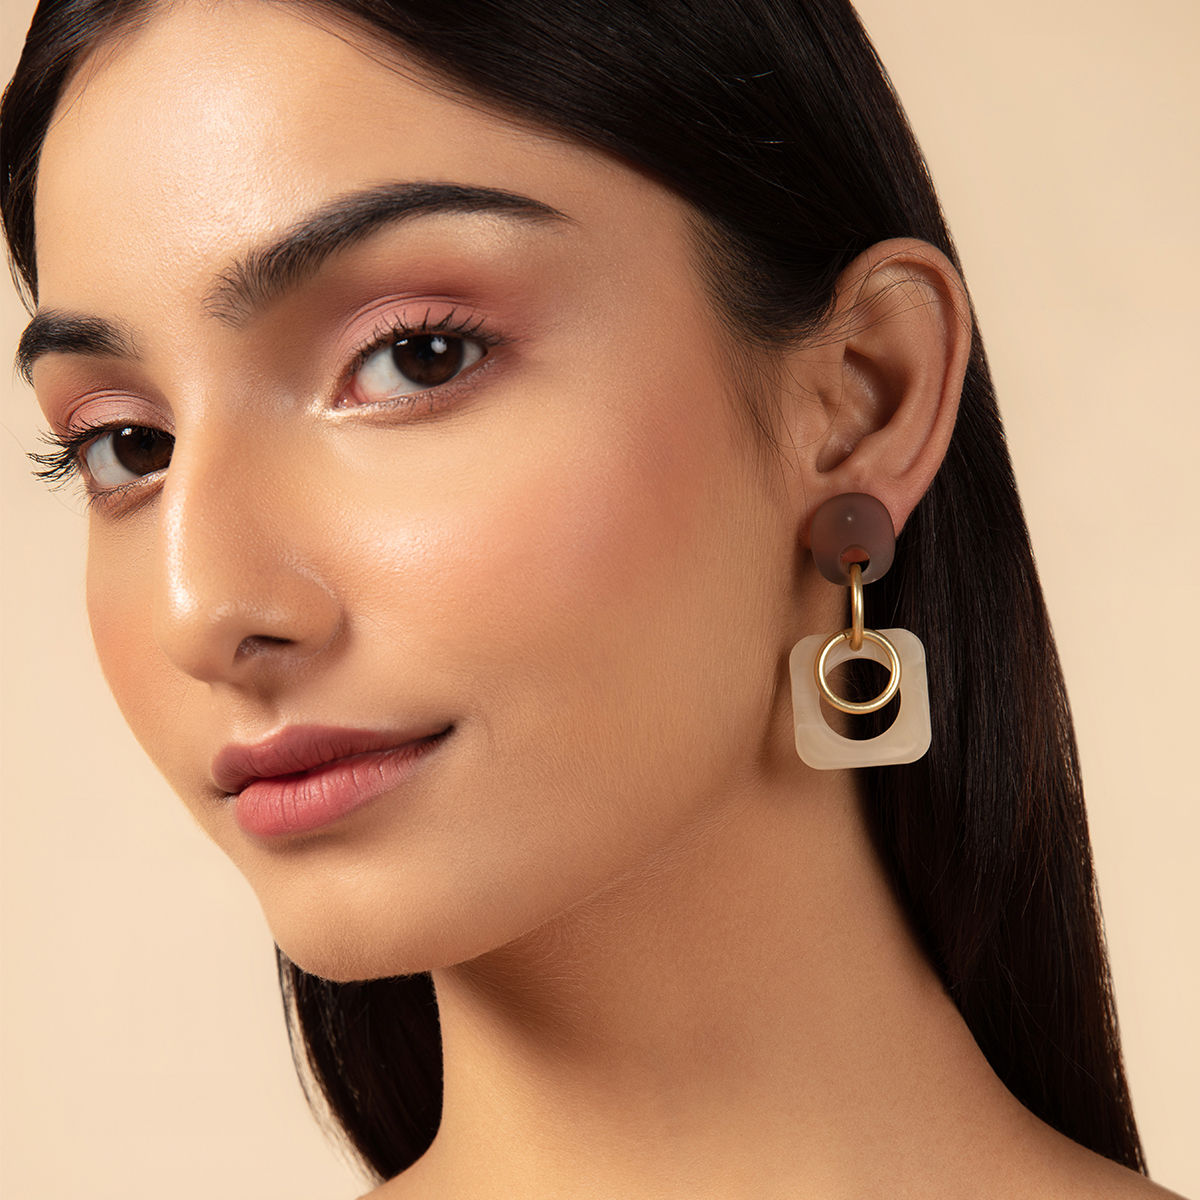 Twenty Dresses by Nykaa Fashion Show A Sizzling Effect Earrings (Beige) At Nykaa, Best Beauty Products Online